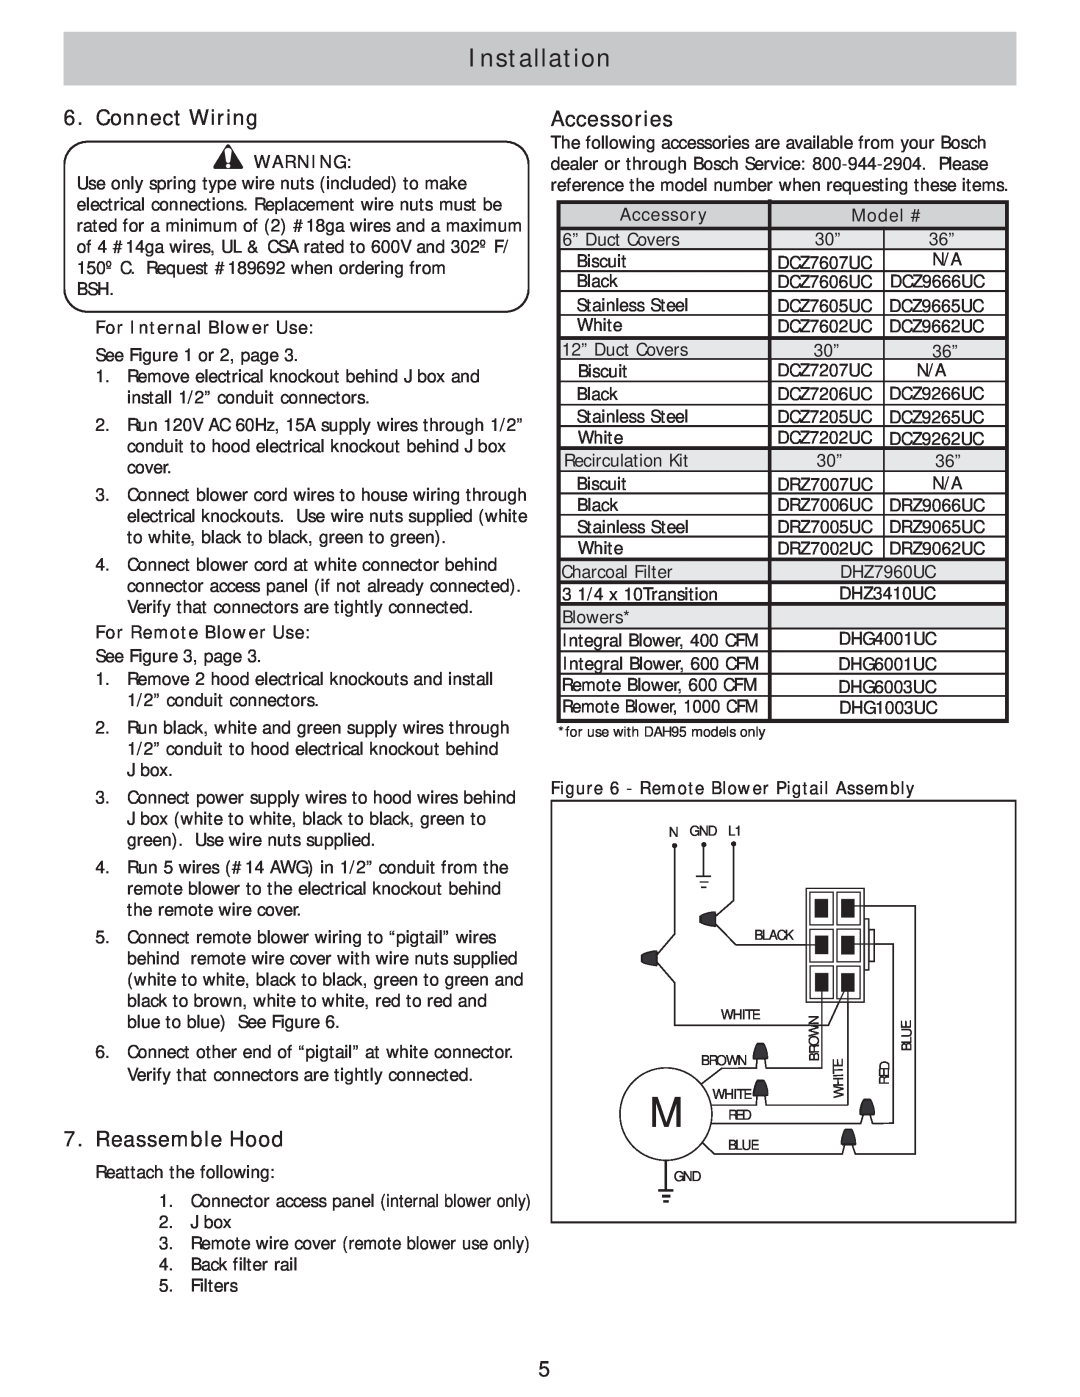 Bosch Appliances DAH93 Connect Wiring, Accessories, Reassemble Hood, For Internal Blower Use, For Remote Blower Use 